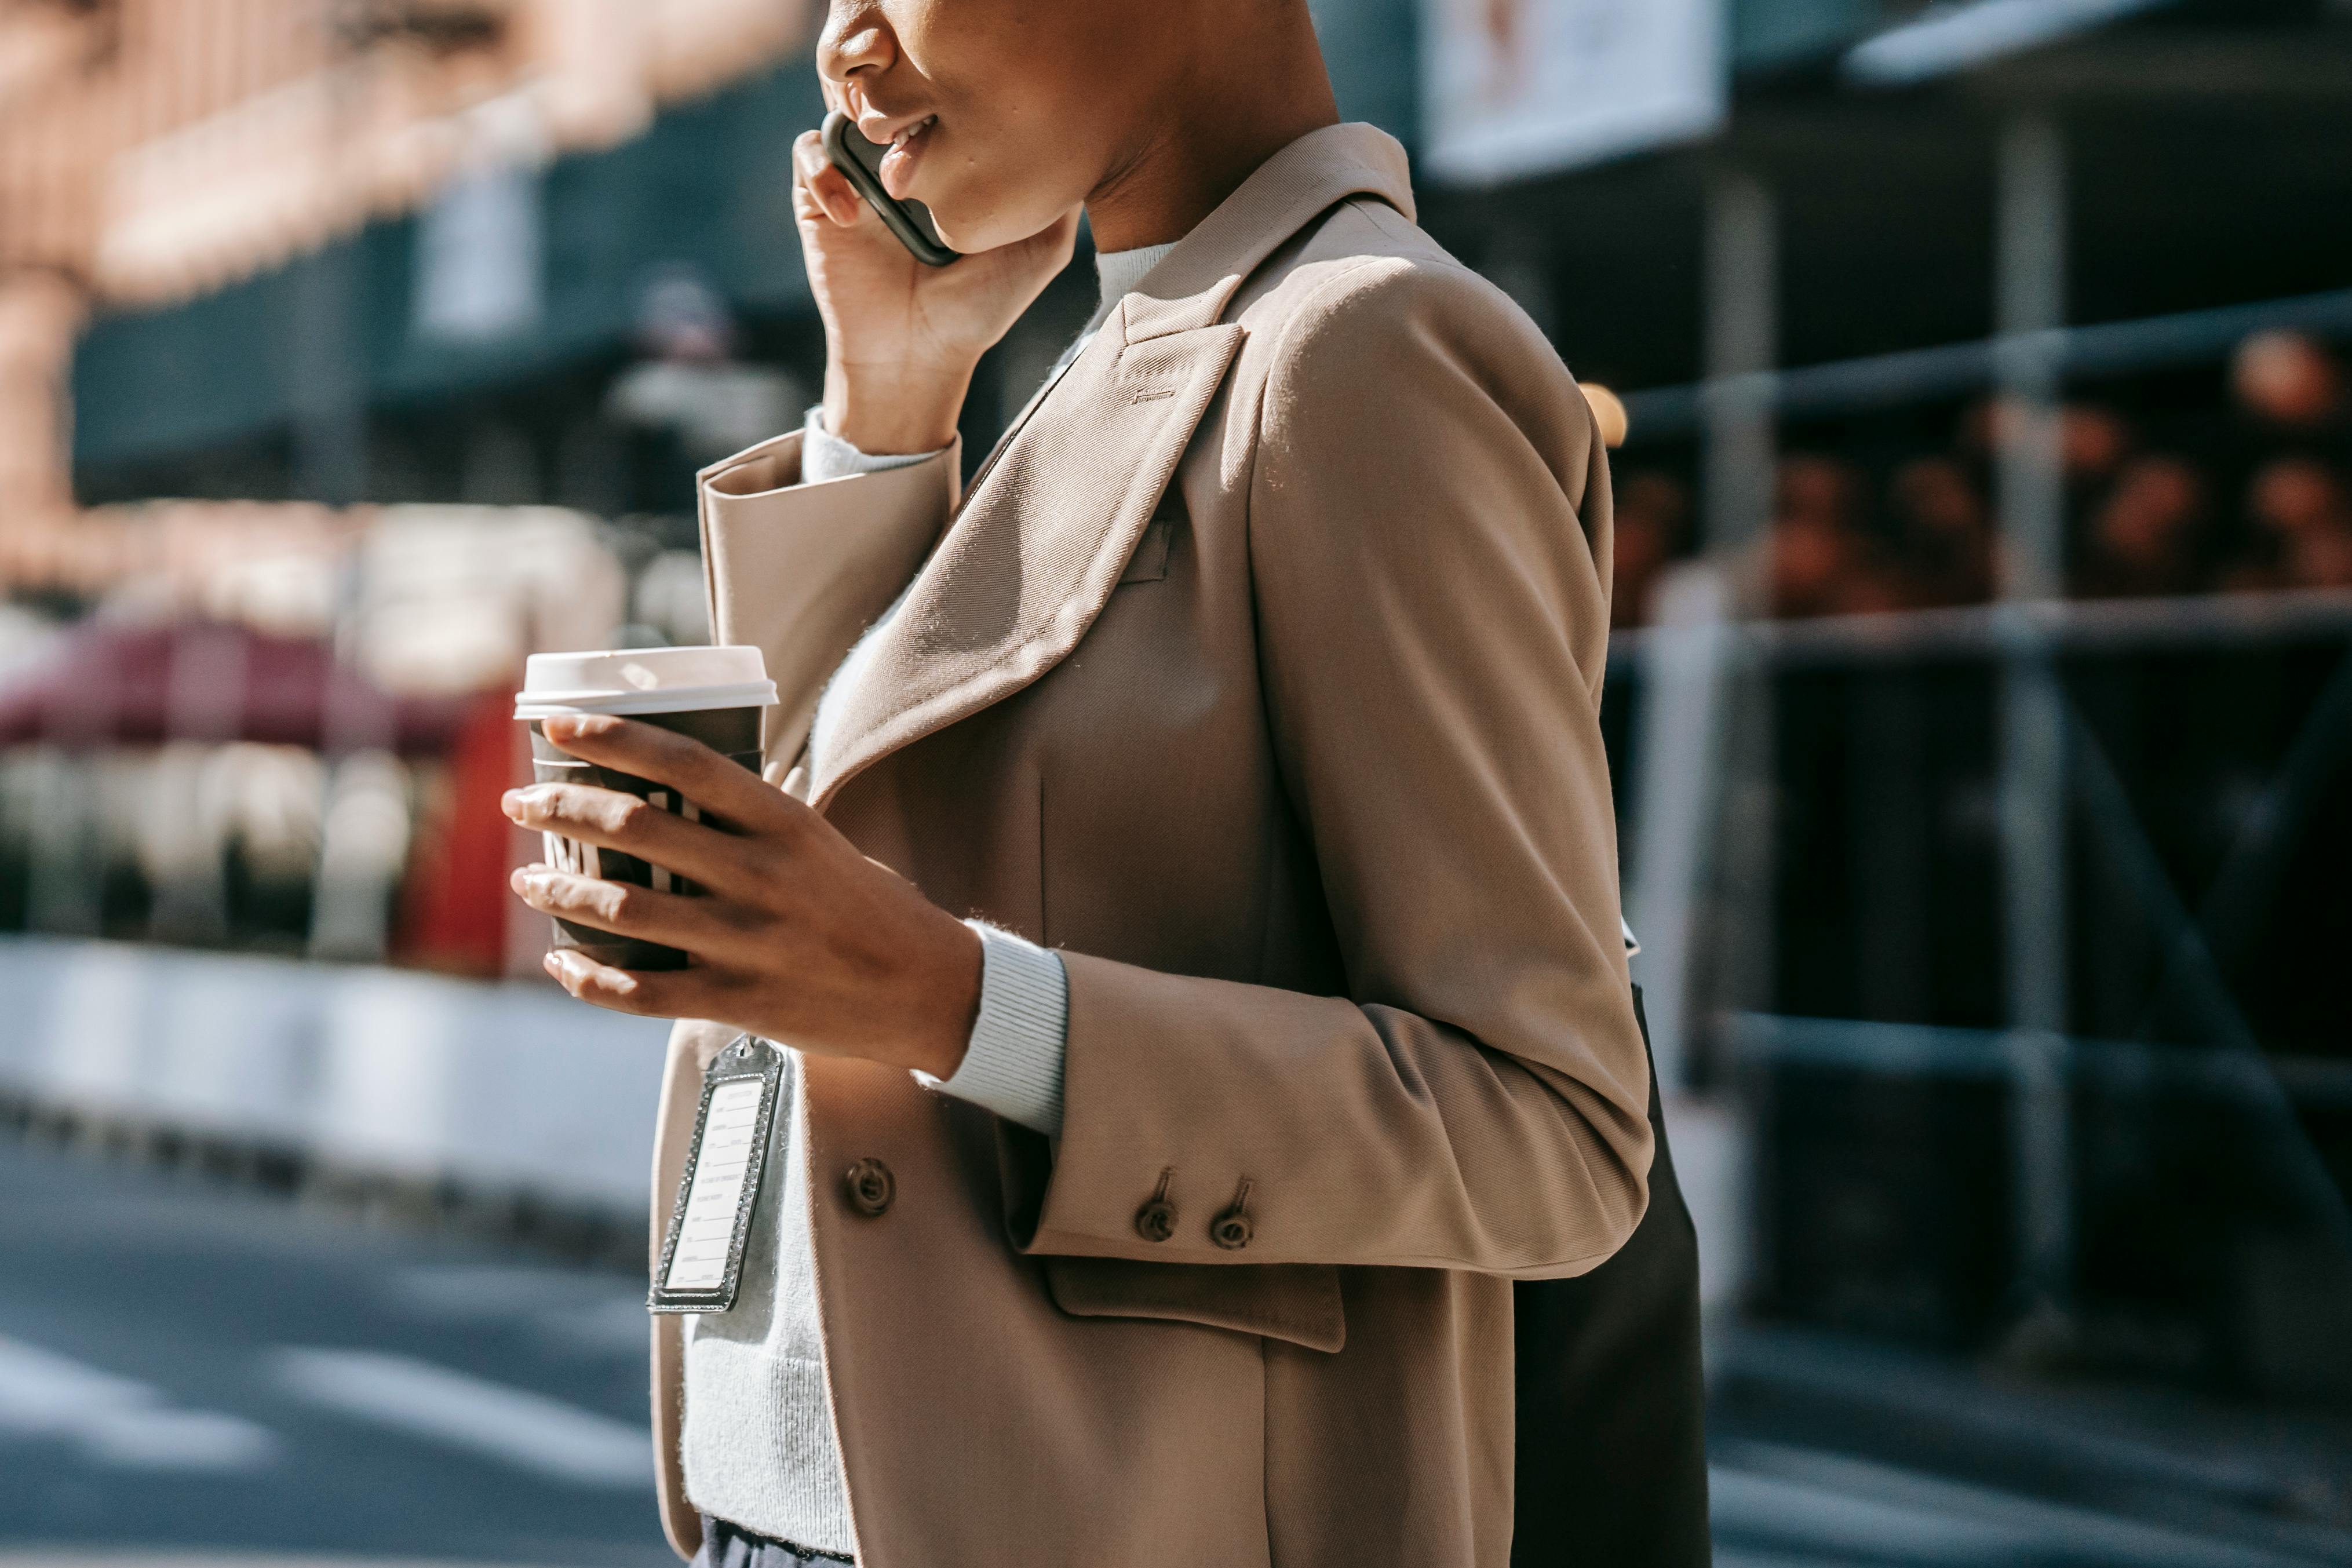 A woman on call | Source: Pexels